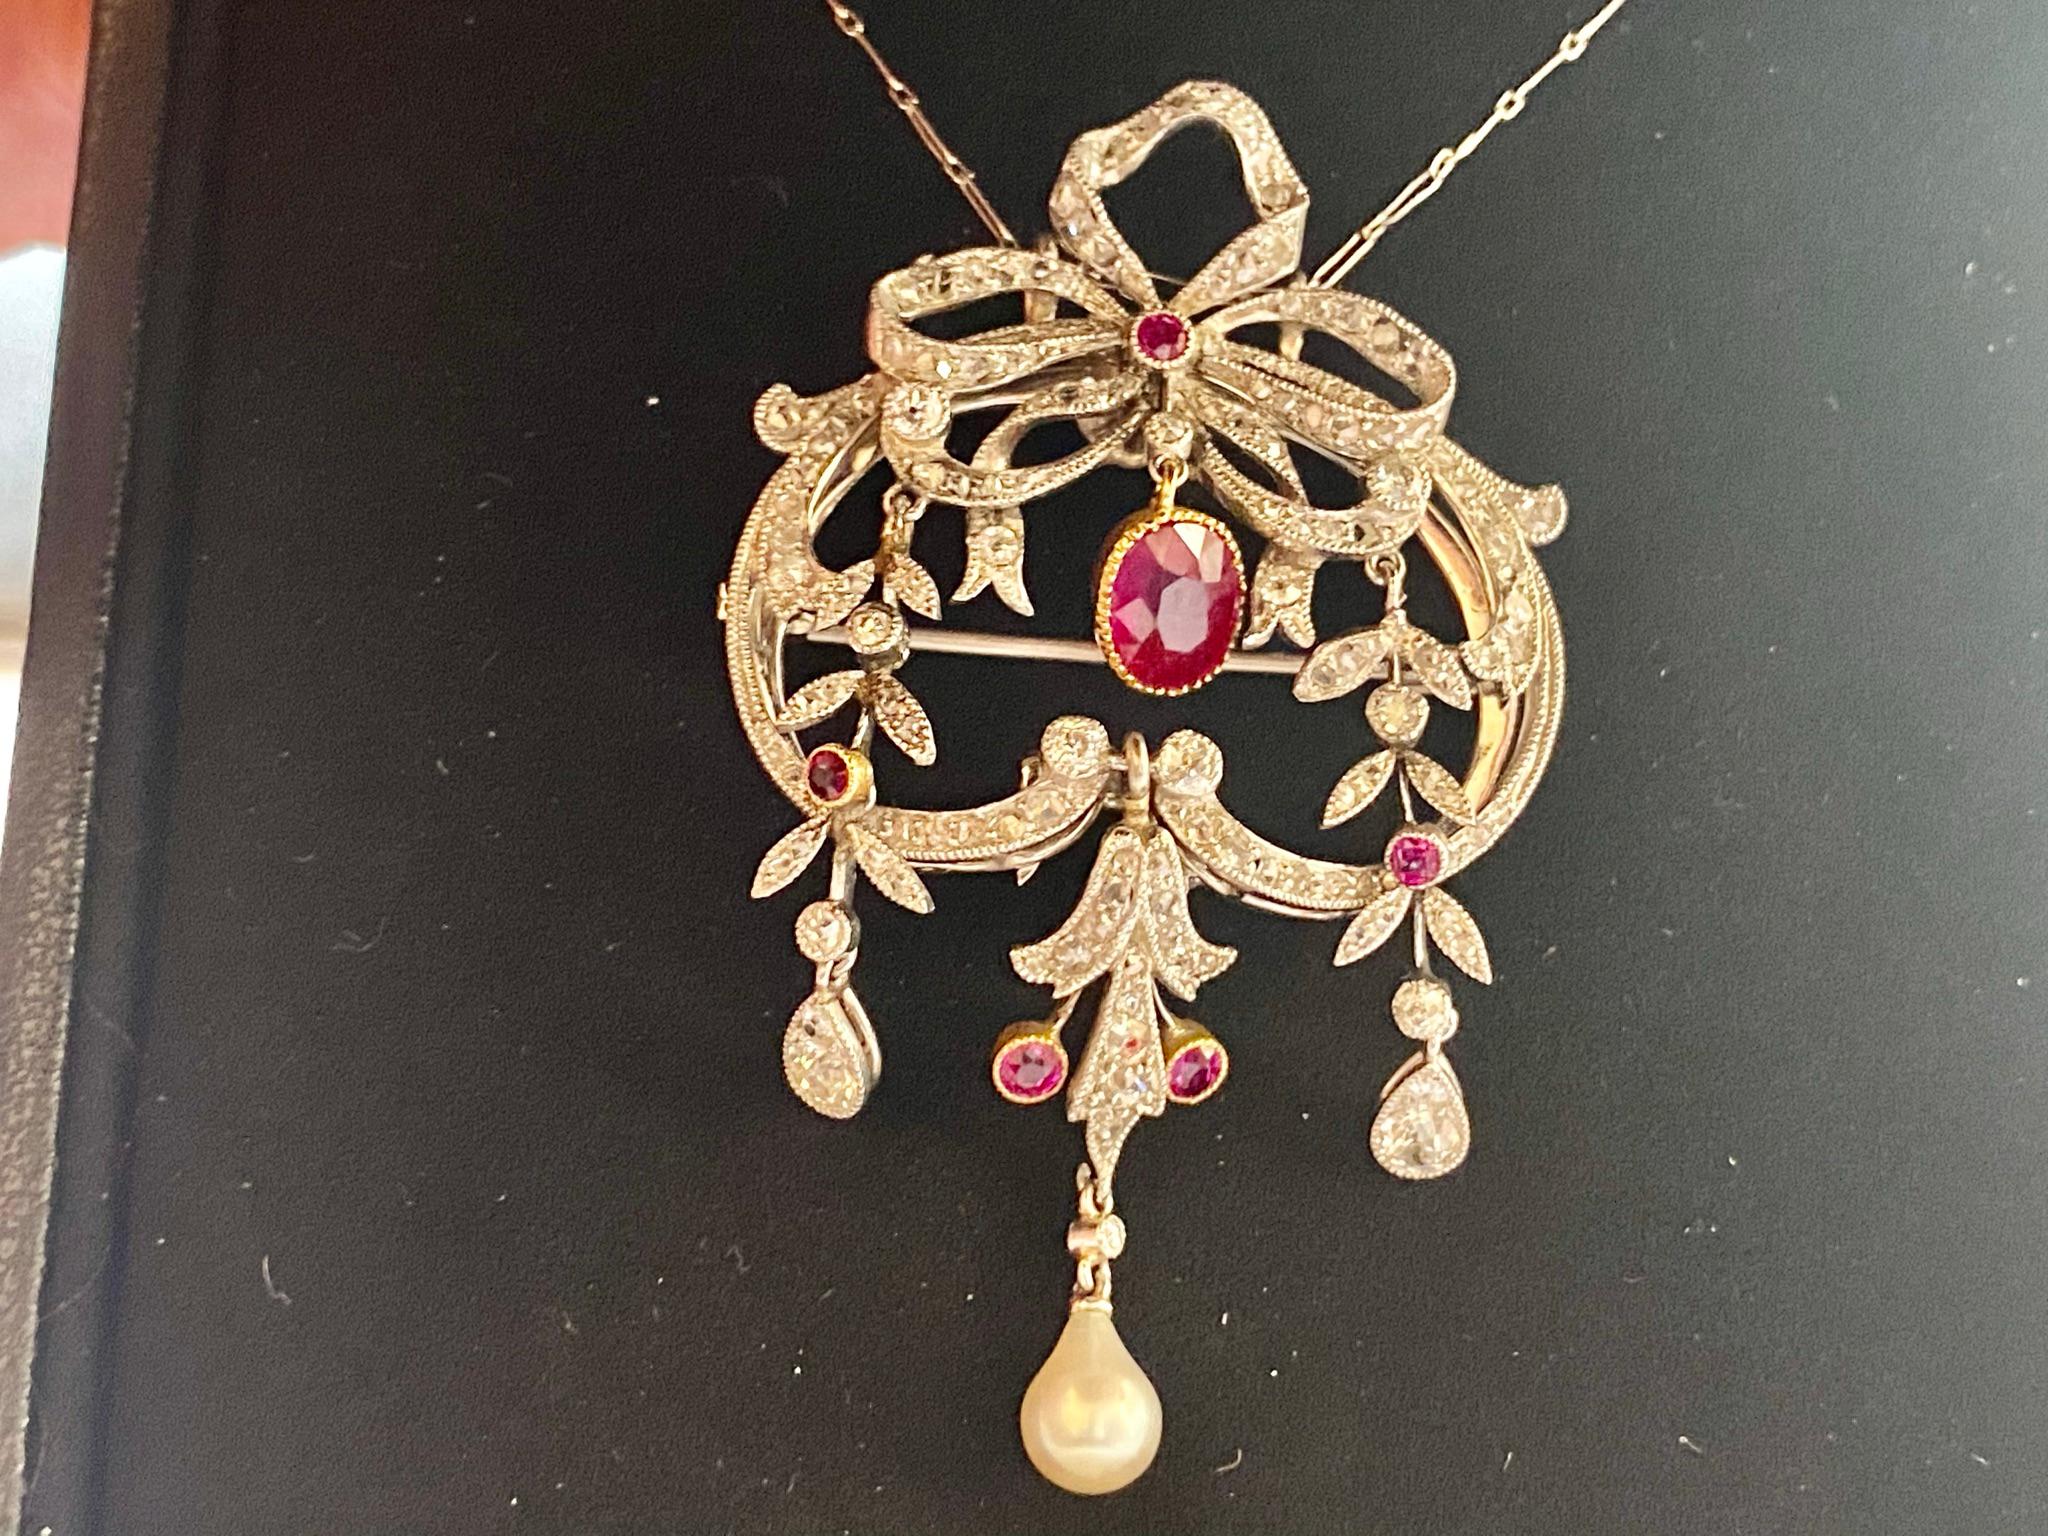 Edwardian Pendant with Chain / Brooch Platinum, Gold, Diamonds and Birma Ruby For Sale 3